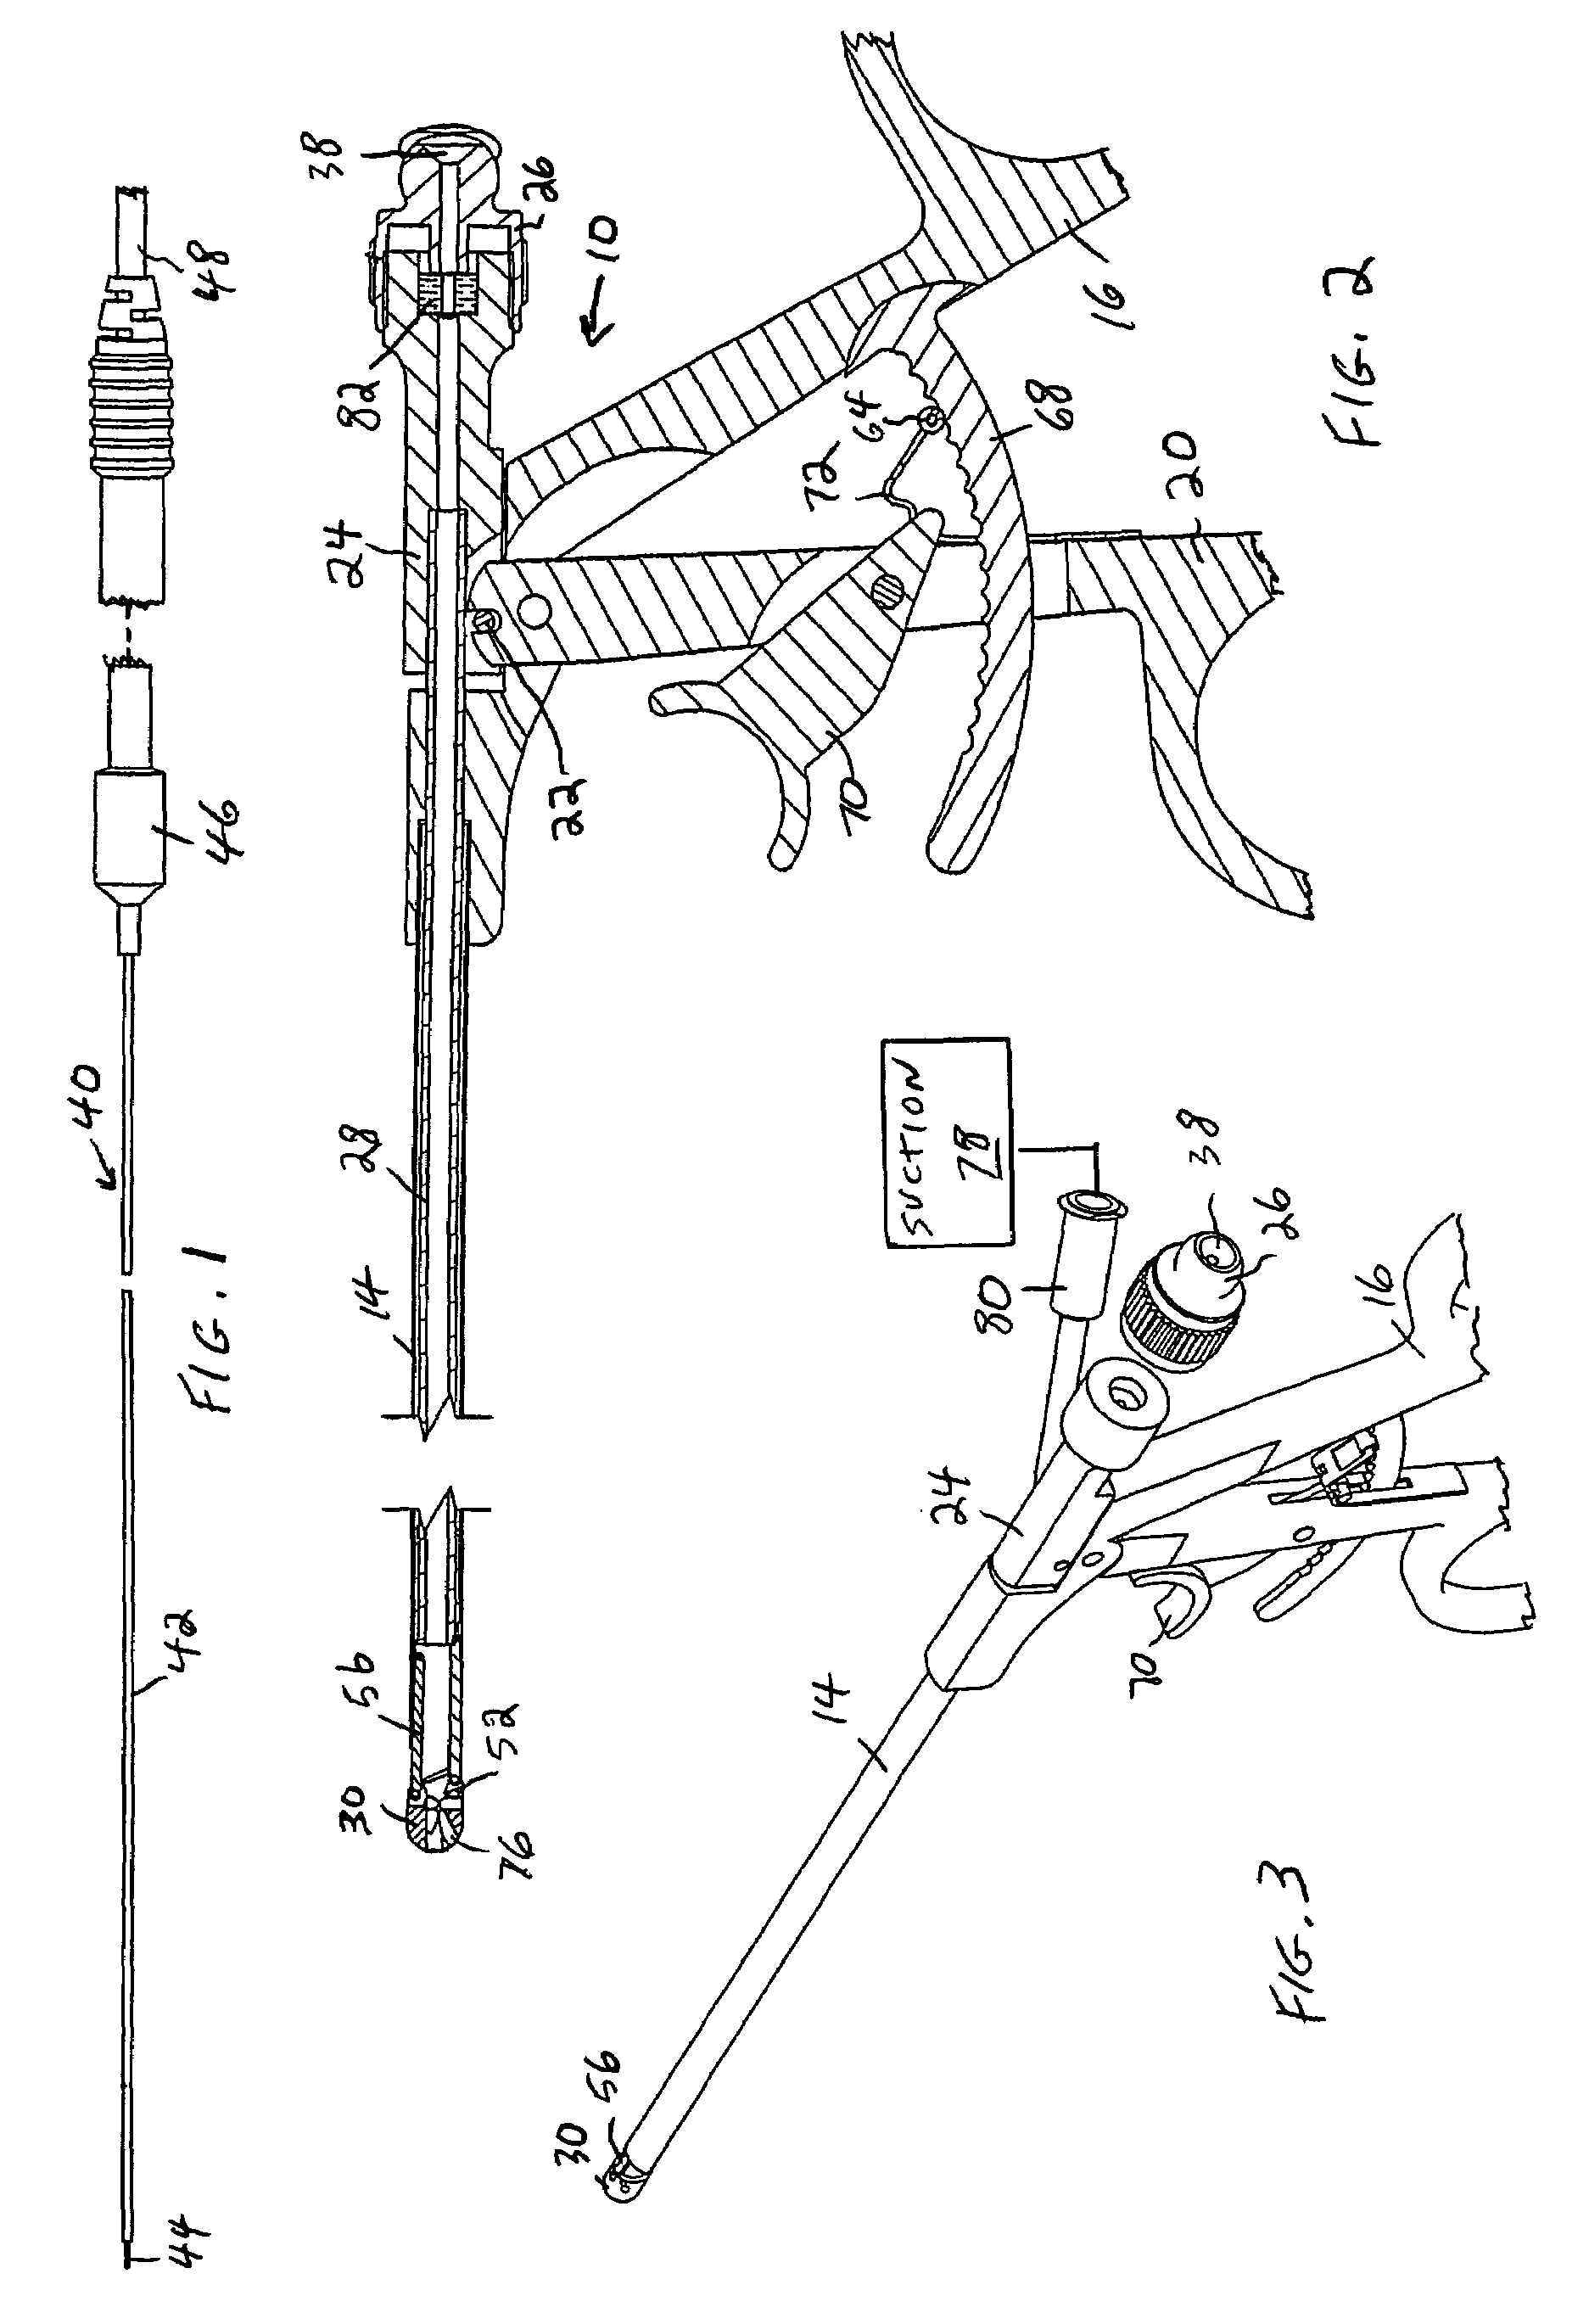 Flexible electrosurgical electrode with manipulator